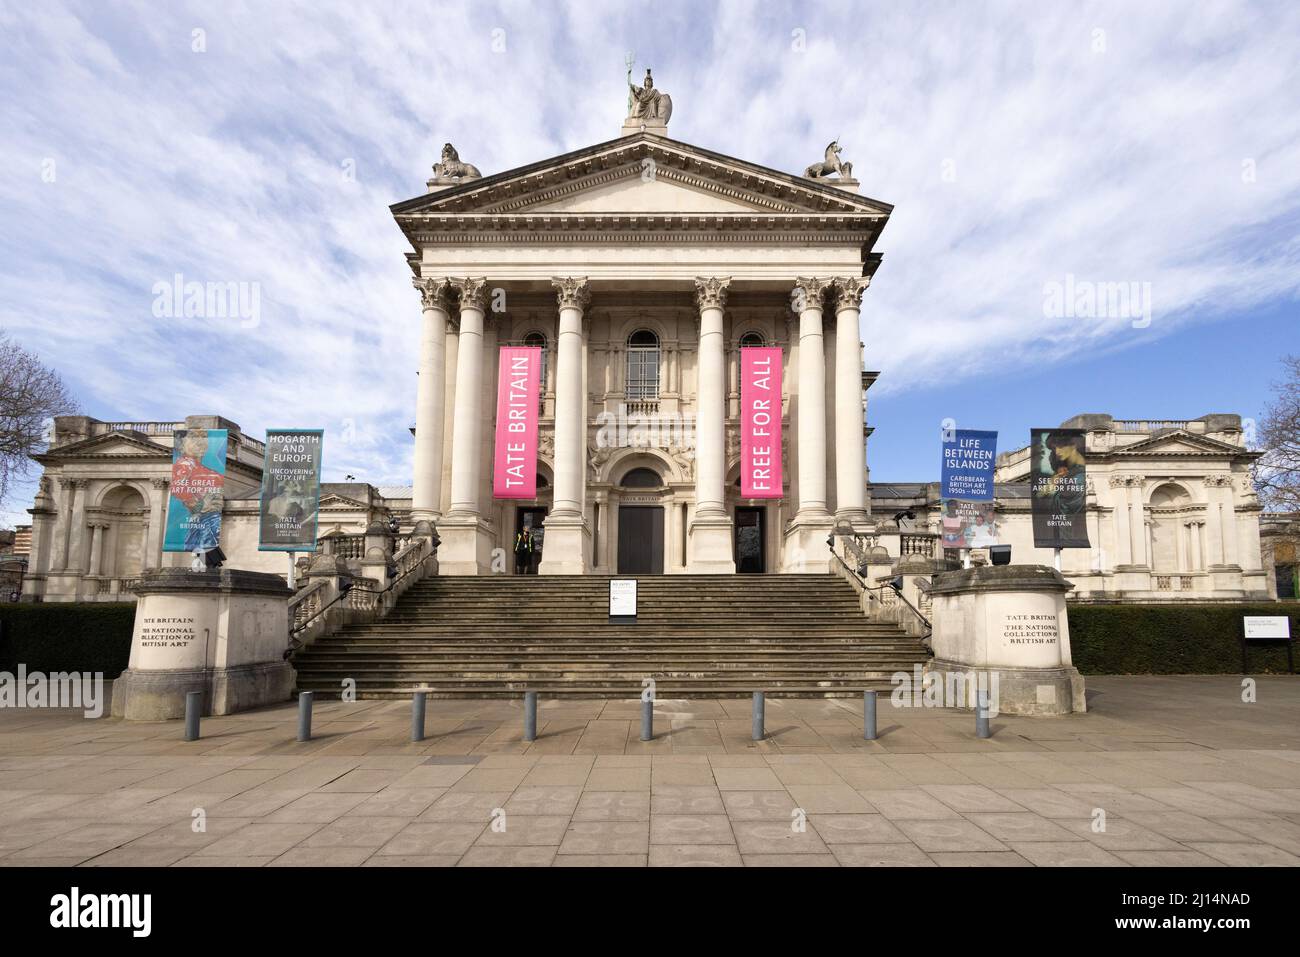 The Tate Britain Art Gallery exterior, Millbank, London UK on a sunny day in spring. Stock Photo